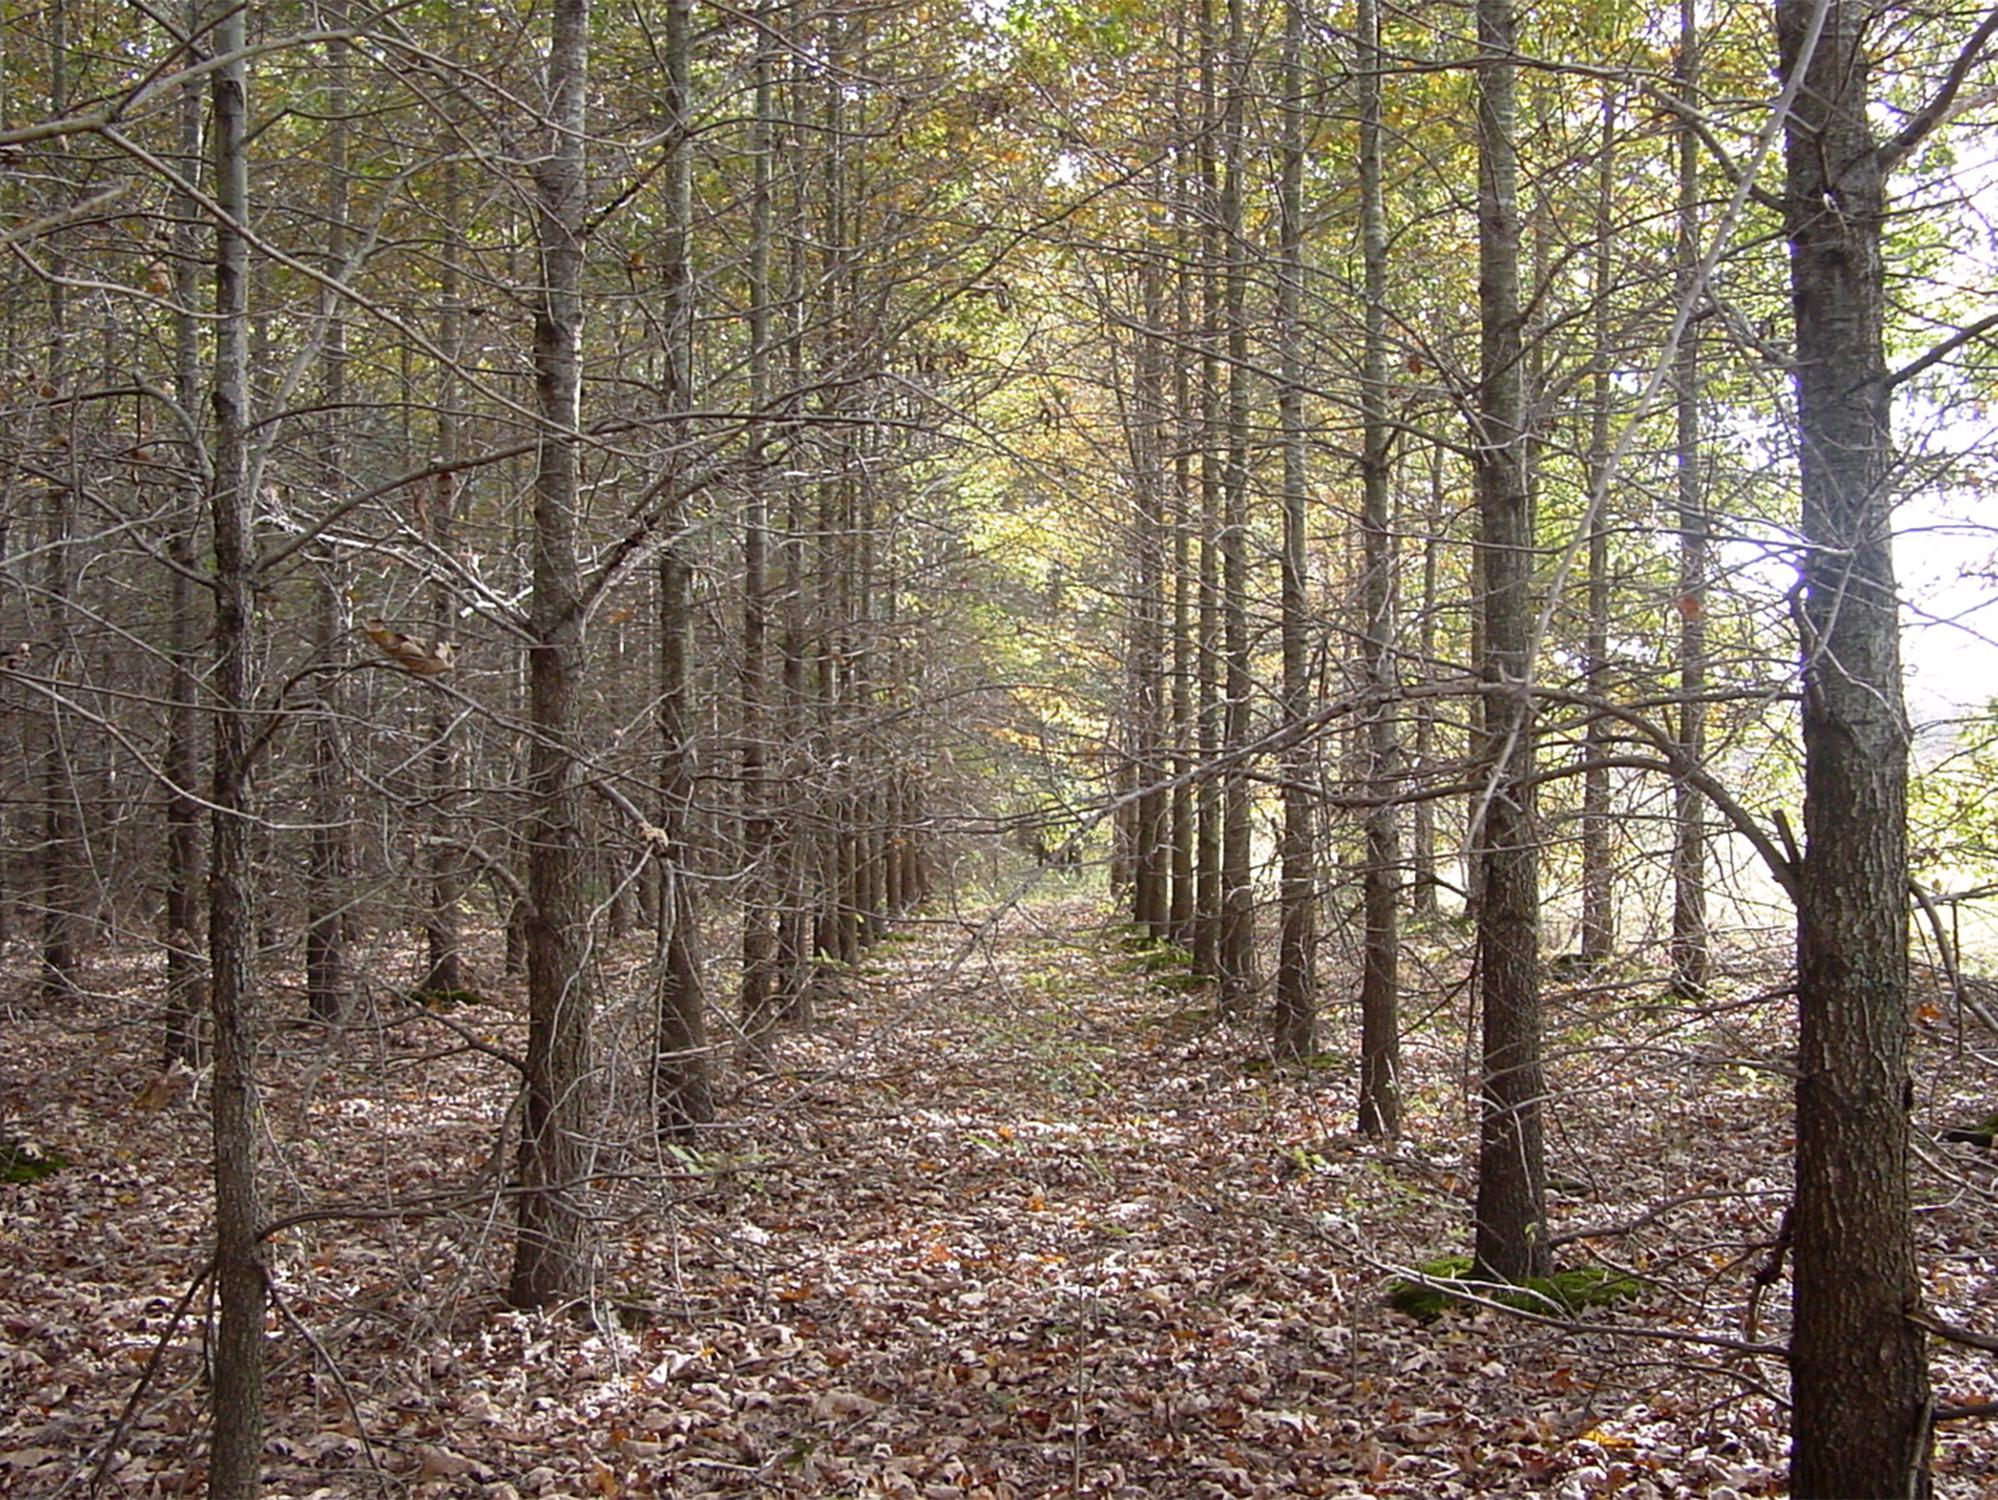 Rows of evenly spaced, young trees with brown leaves on the ground.